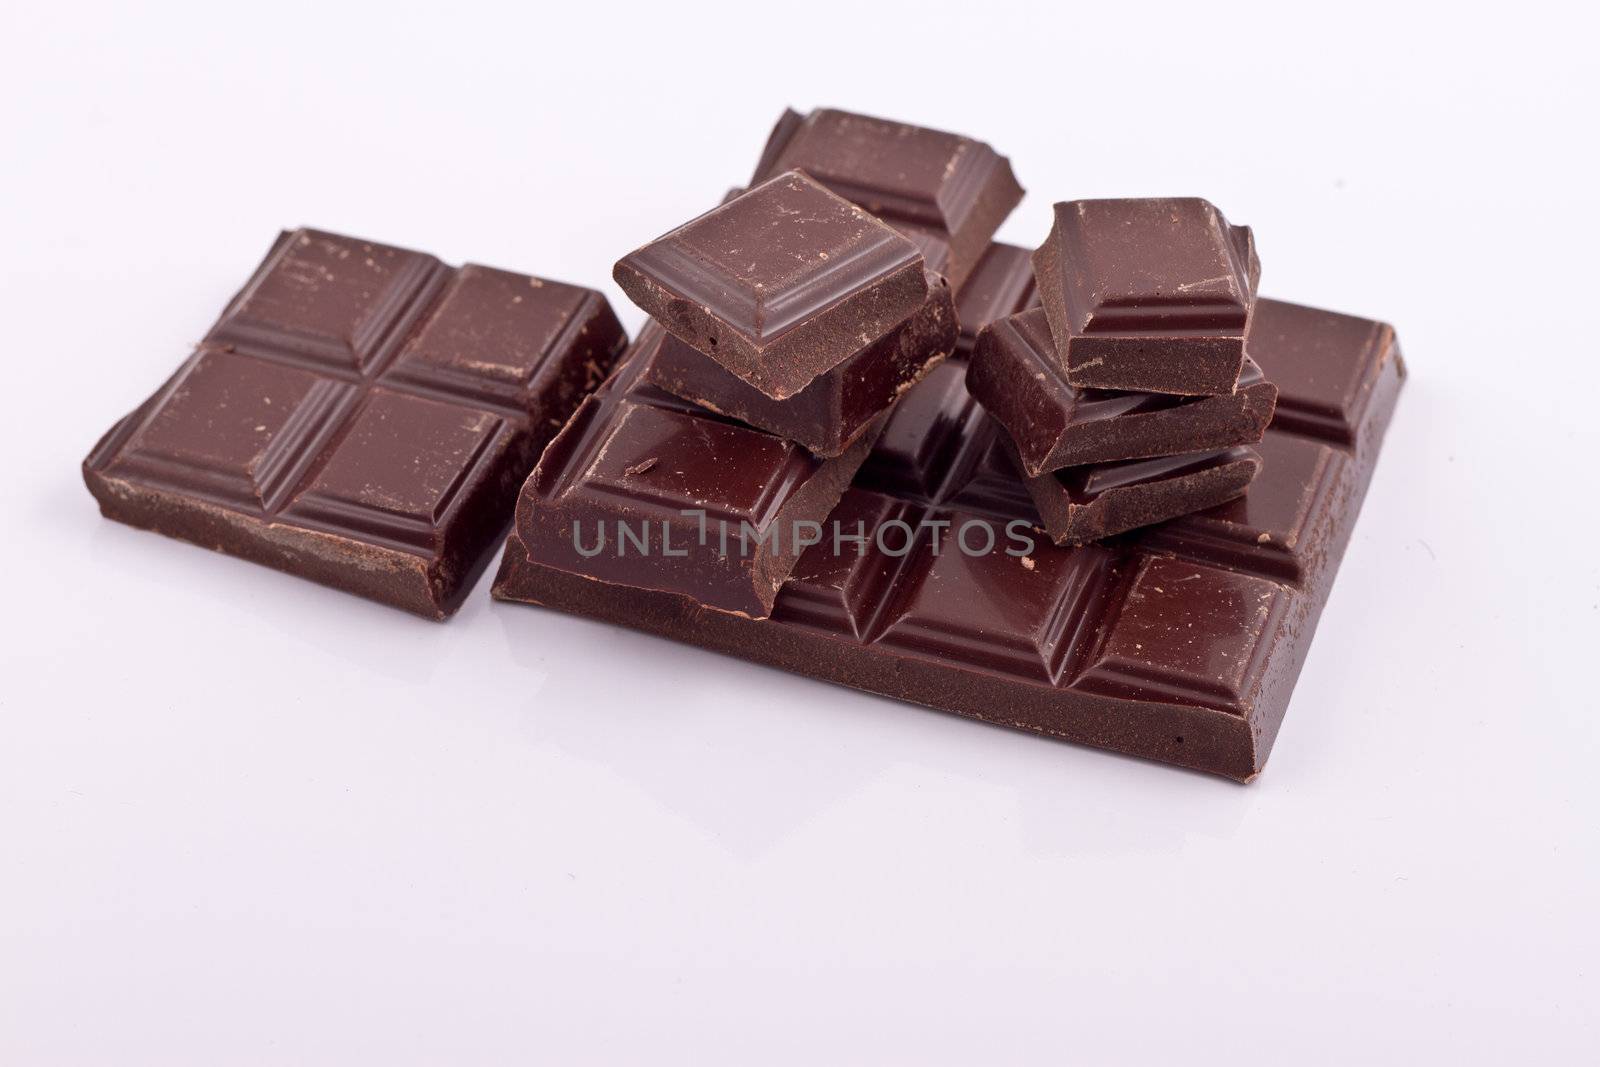 Stacked cholate pieces on white background